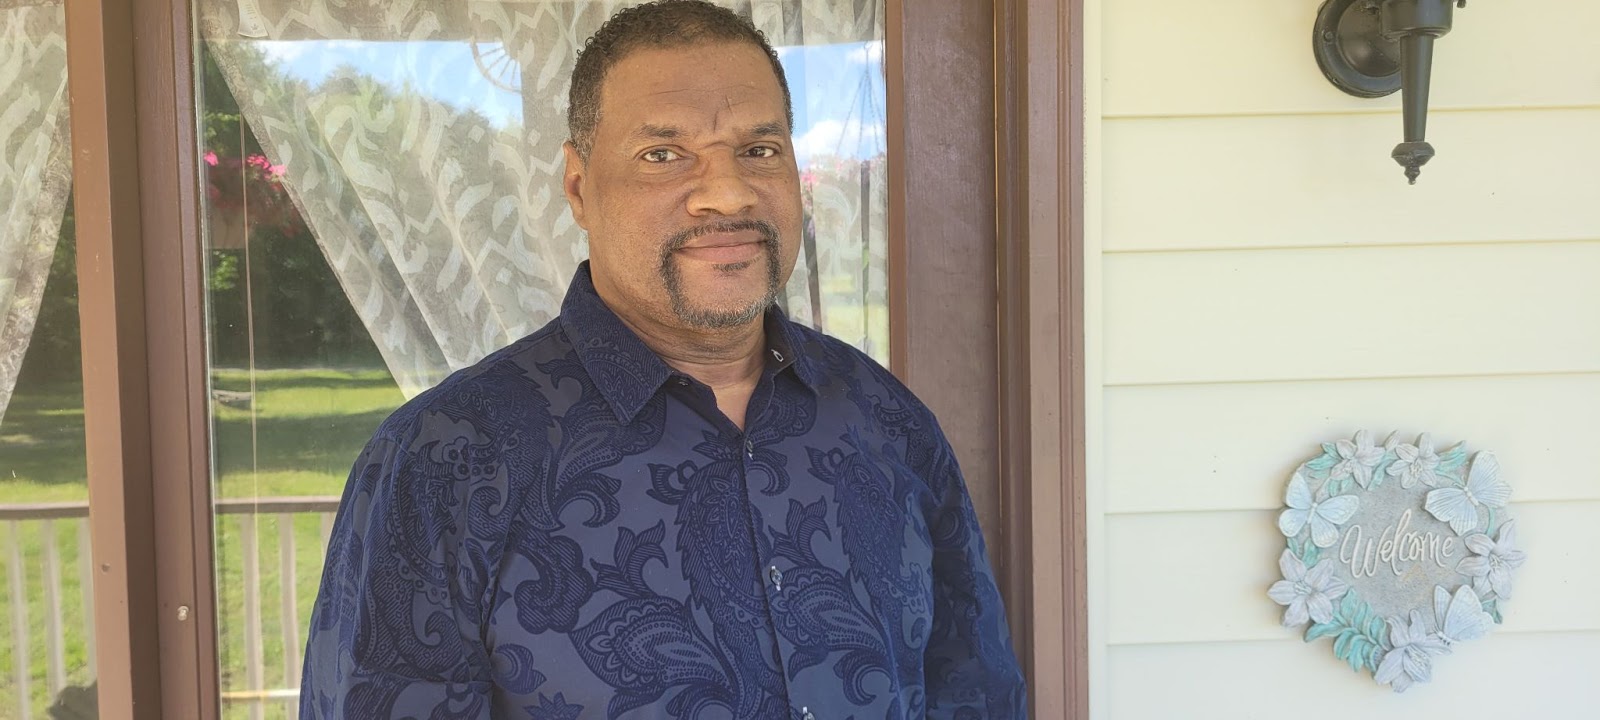 PVCC Professor Bruce Robinson stands on his porch in a blue shirt